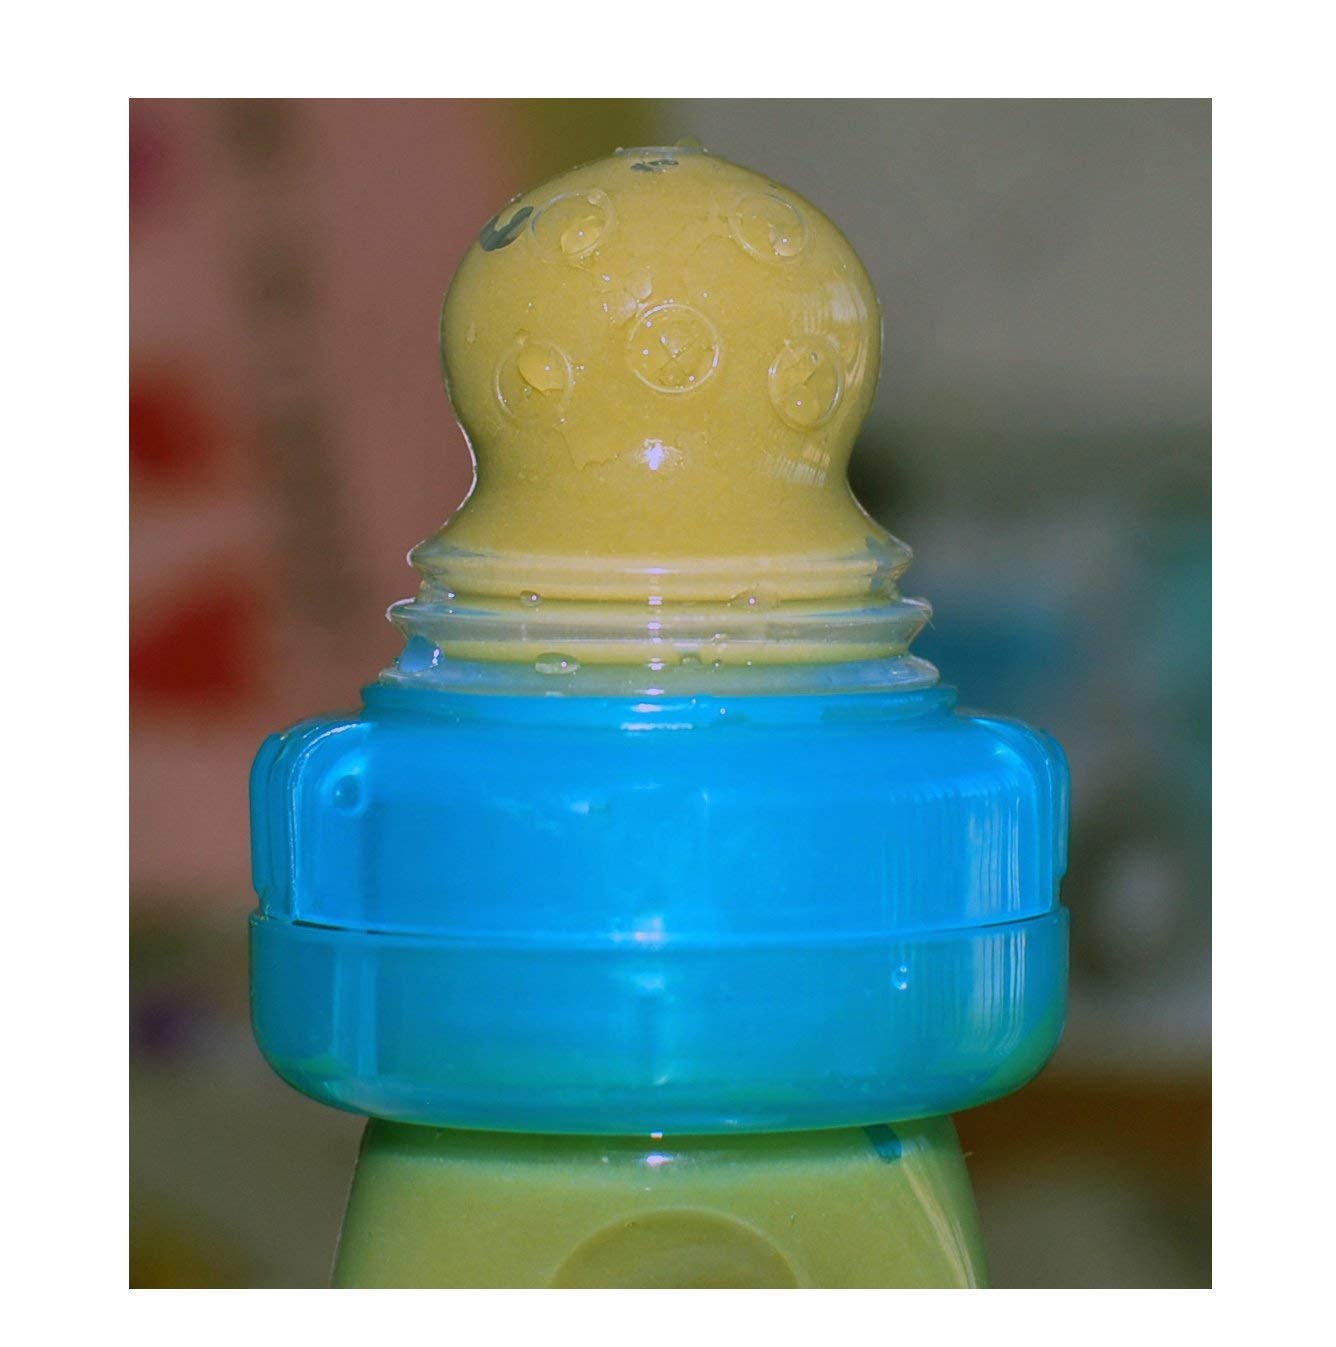 Nuby EZ Squee-Z Silicone Self Feeding Baby Food Dispenser - Colors May Vary